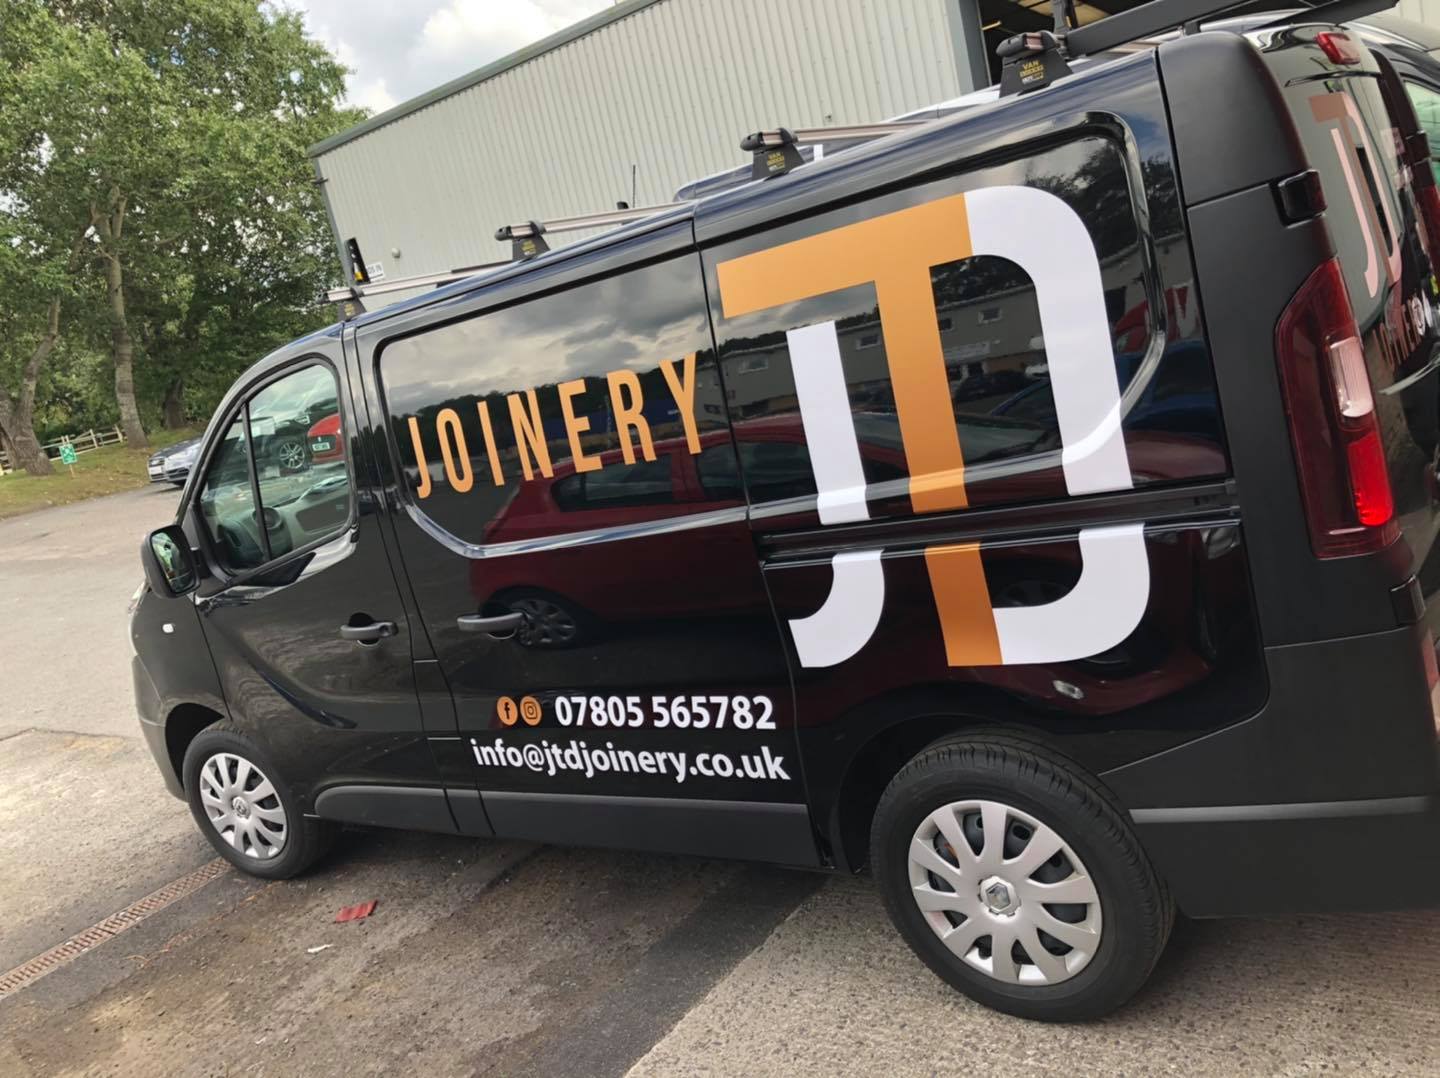 JTD Joinery